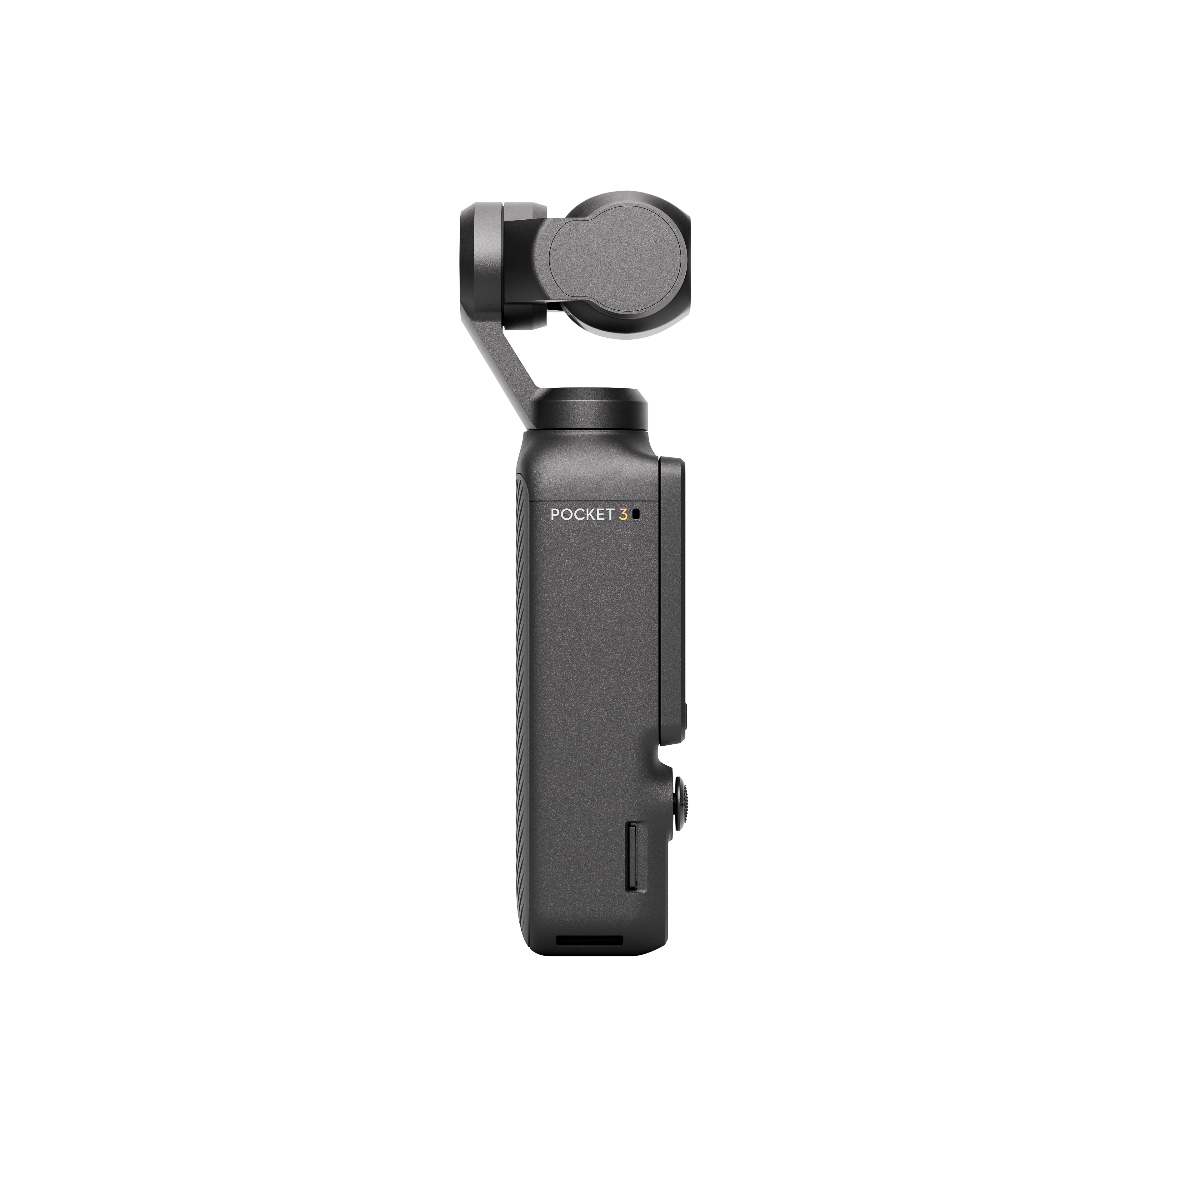 DJI Action 2 multifunctional cam has a magnetic locking design for module  switching » Gadget Flow